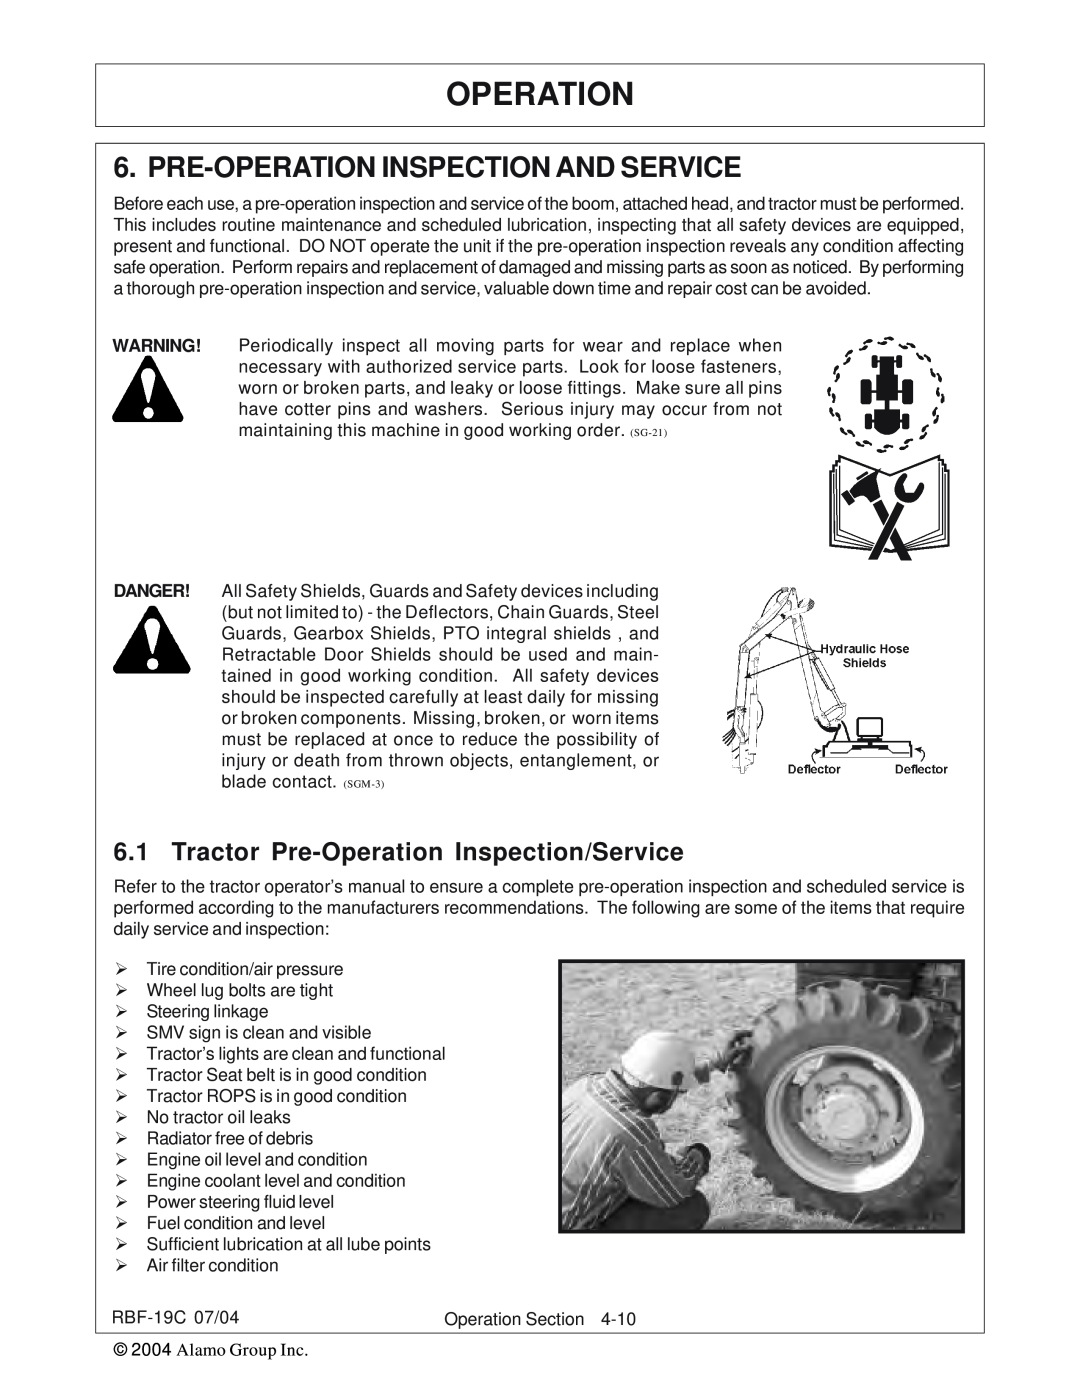 Tiger RBF-19C manual Pre-Operationinspection And Service, Tractor Pre-OperationInspection/Service 